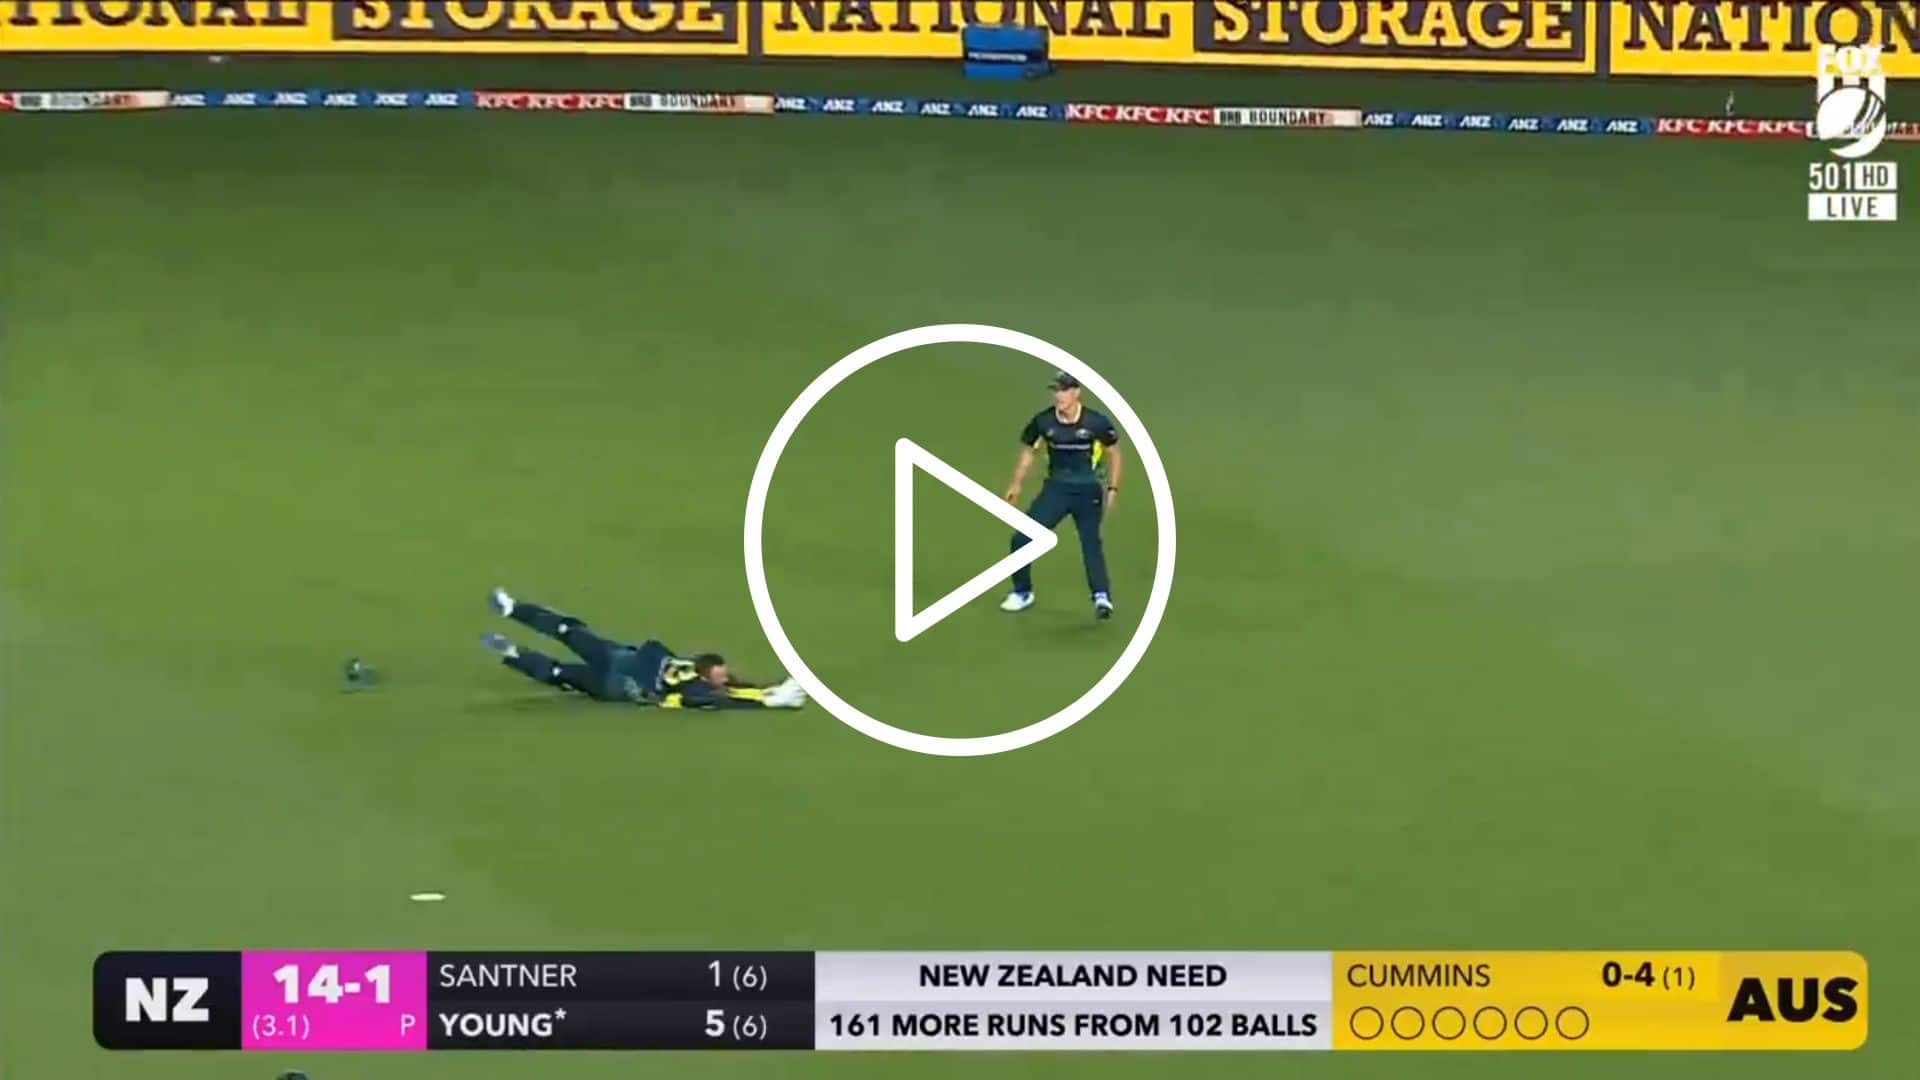 [Watch] Matthew Wade Takes A Flying Stunner To Dismiss Will Young Off Pat Cummins' Delivery